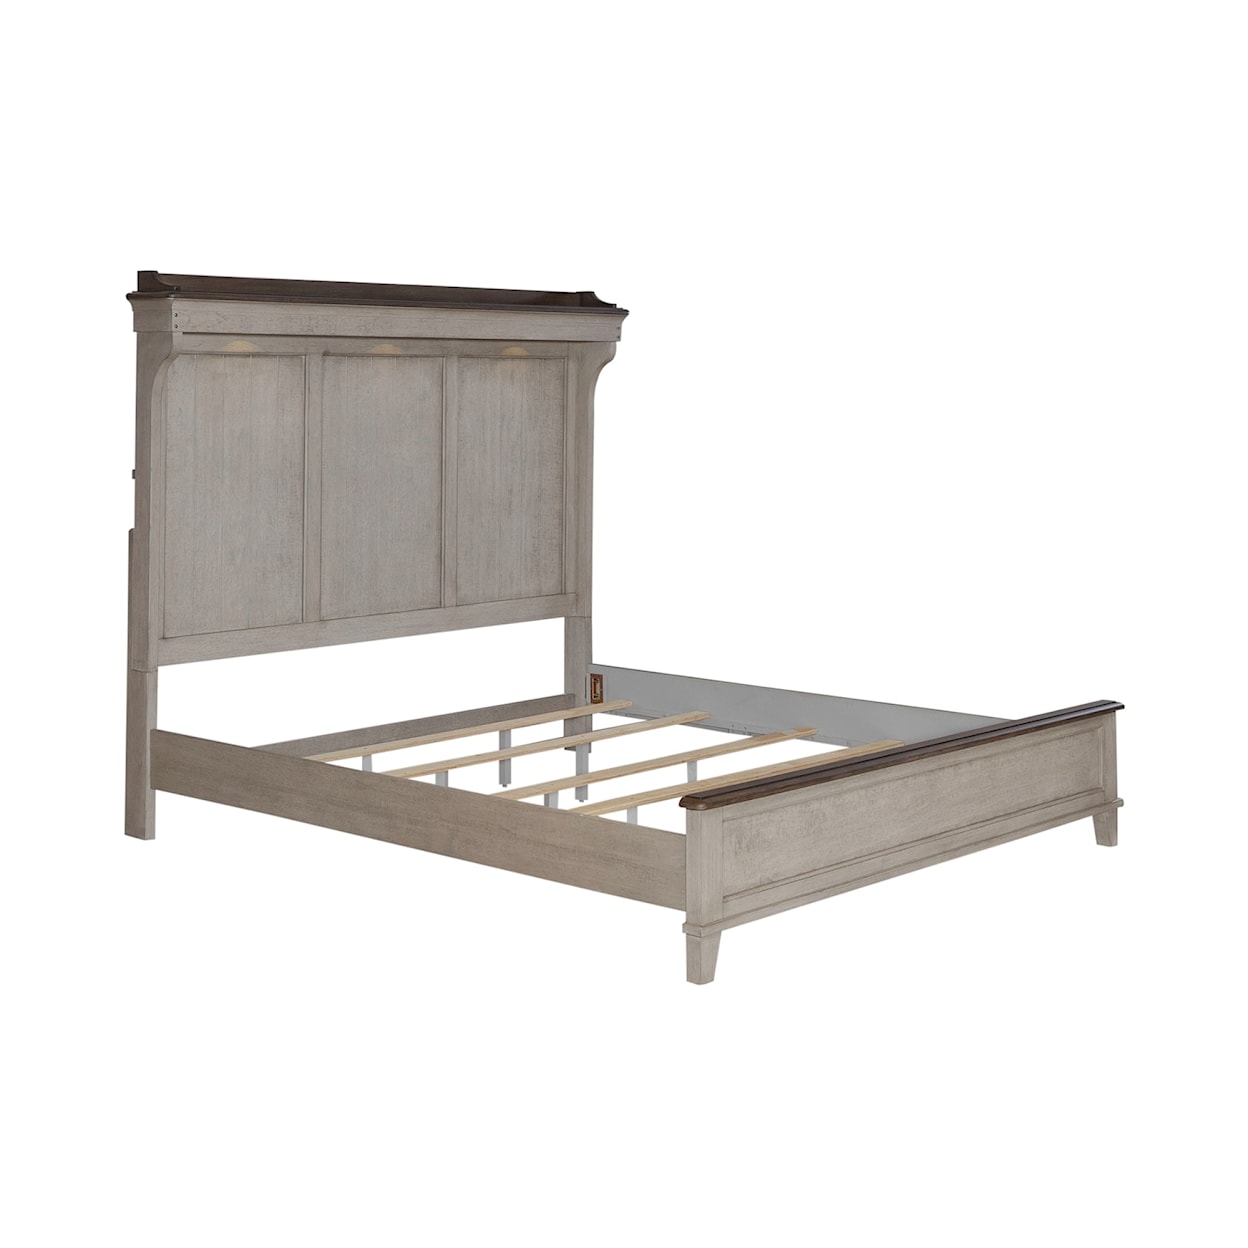 Liberty Furniture Ivy Hollow King Mantle Bed